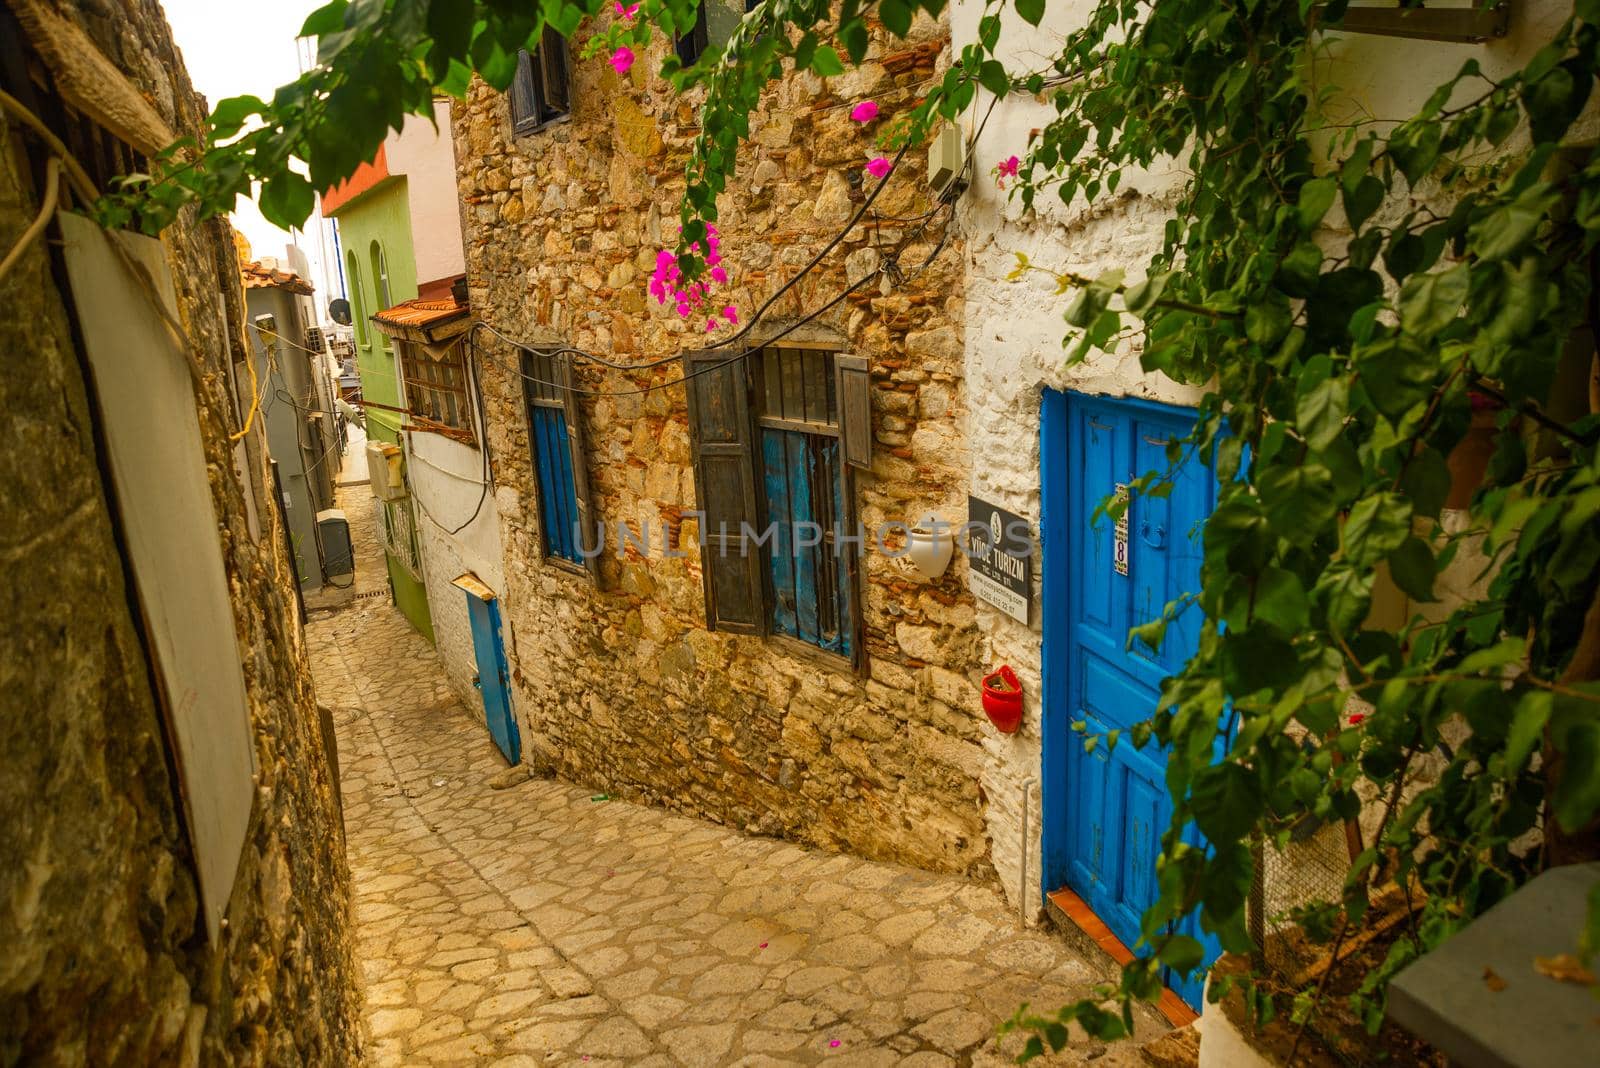 MARMARIS, MUGLA, TURKEY: Ornate street with old houses in the historical center in Marmaris. Narrow streets with stairs among the houses with white brick, green plants and flowers.